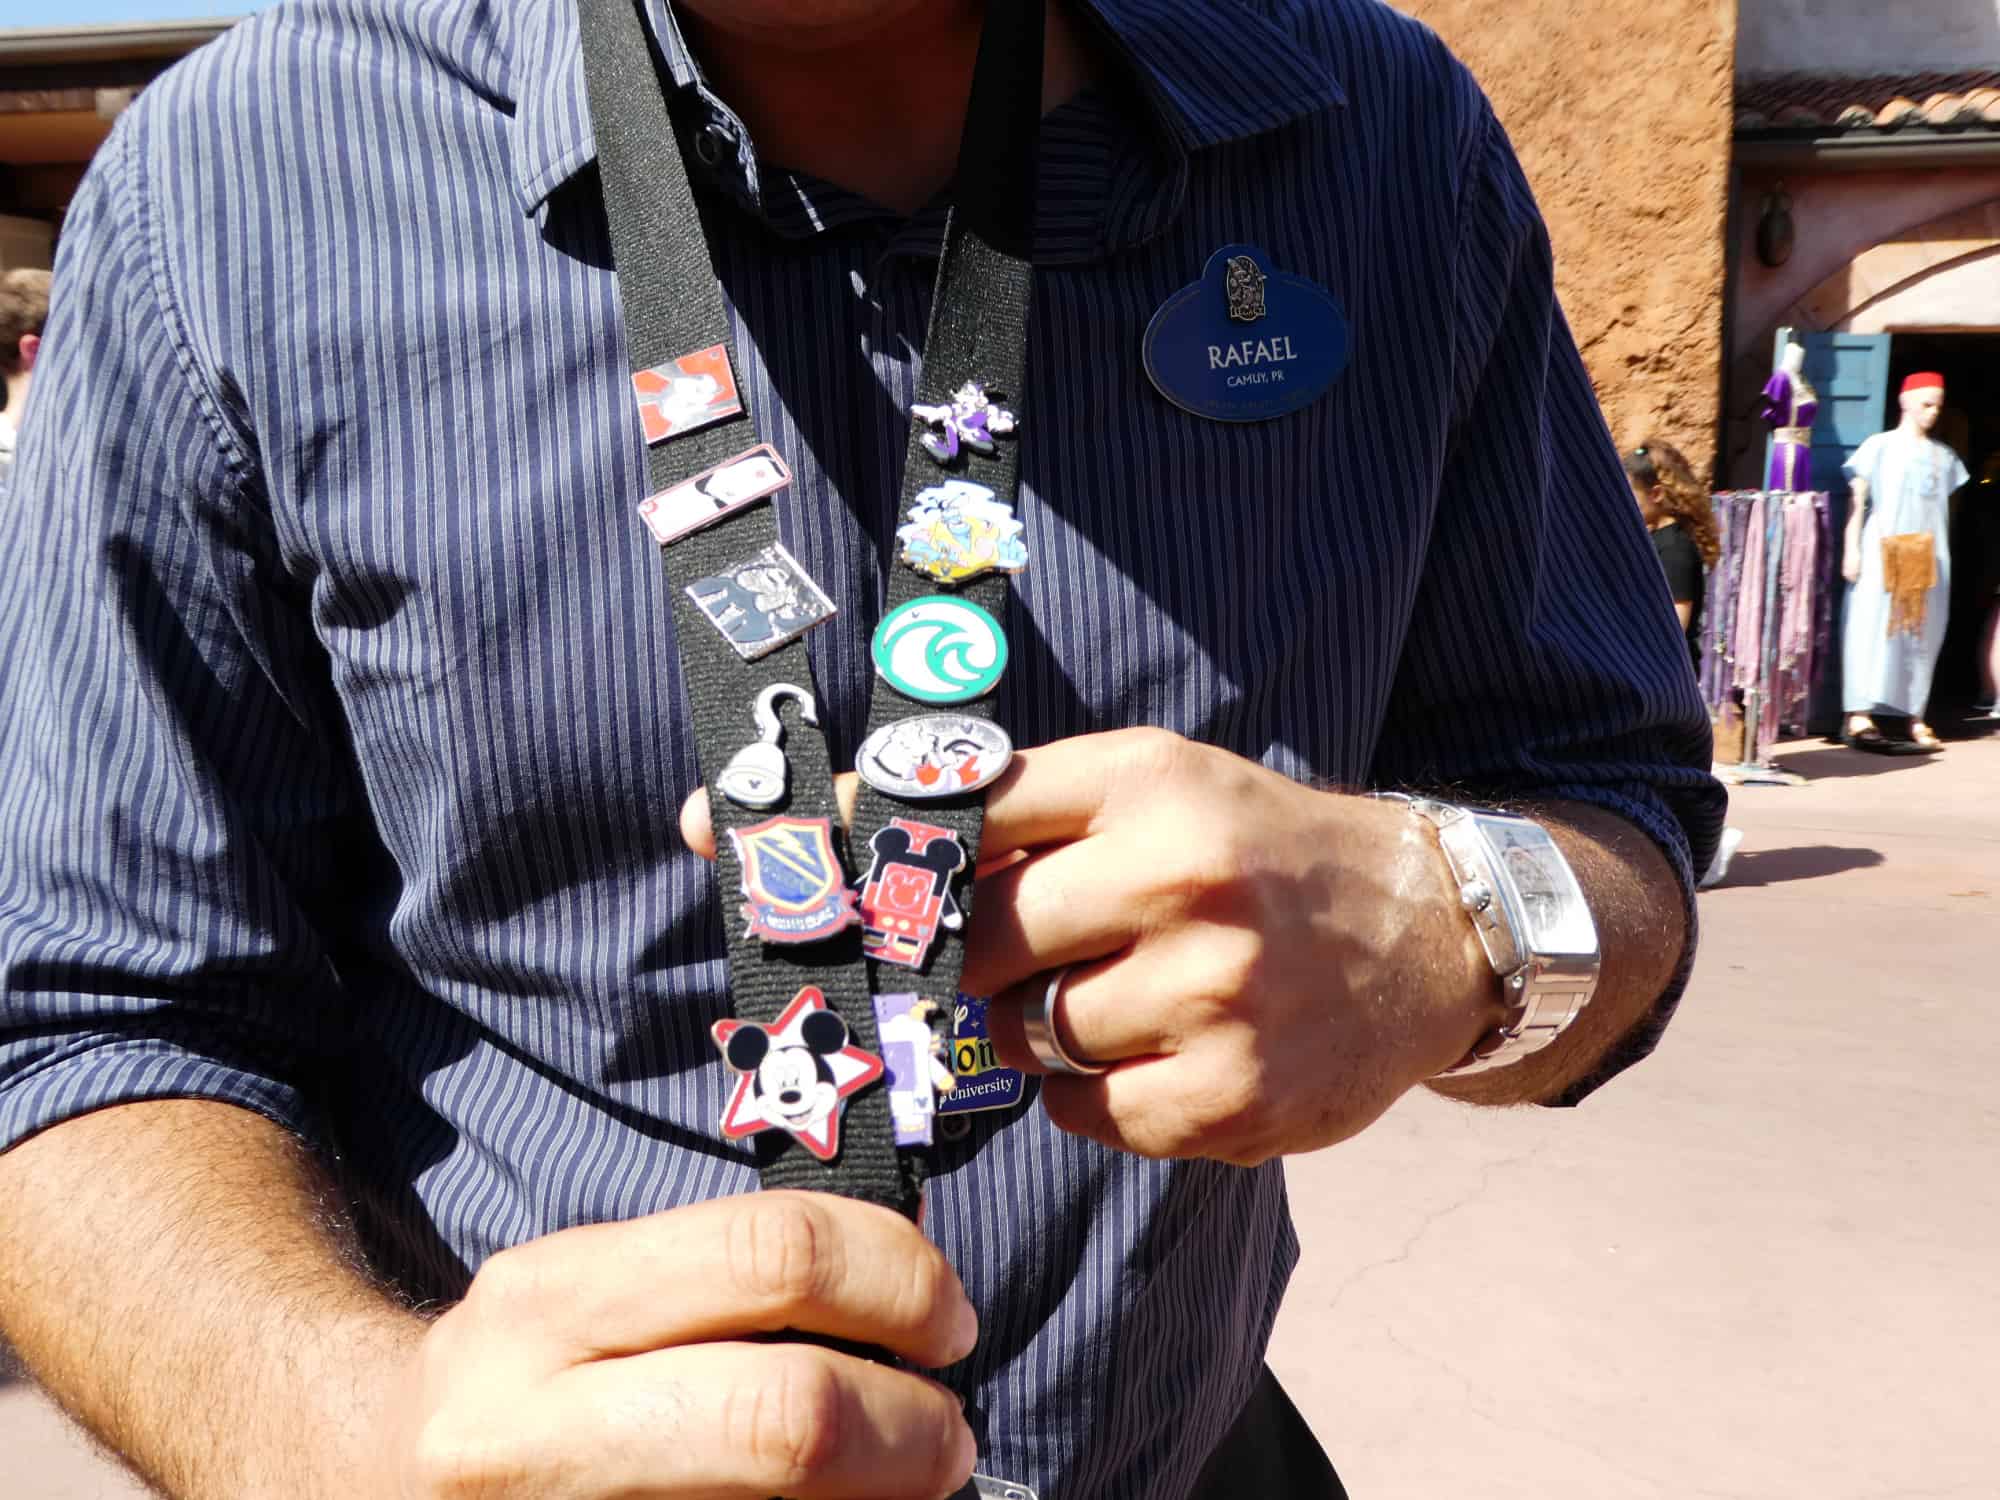 Tips for helping your kids start pin trading at Disney World